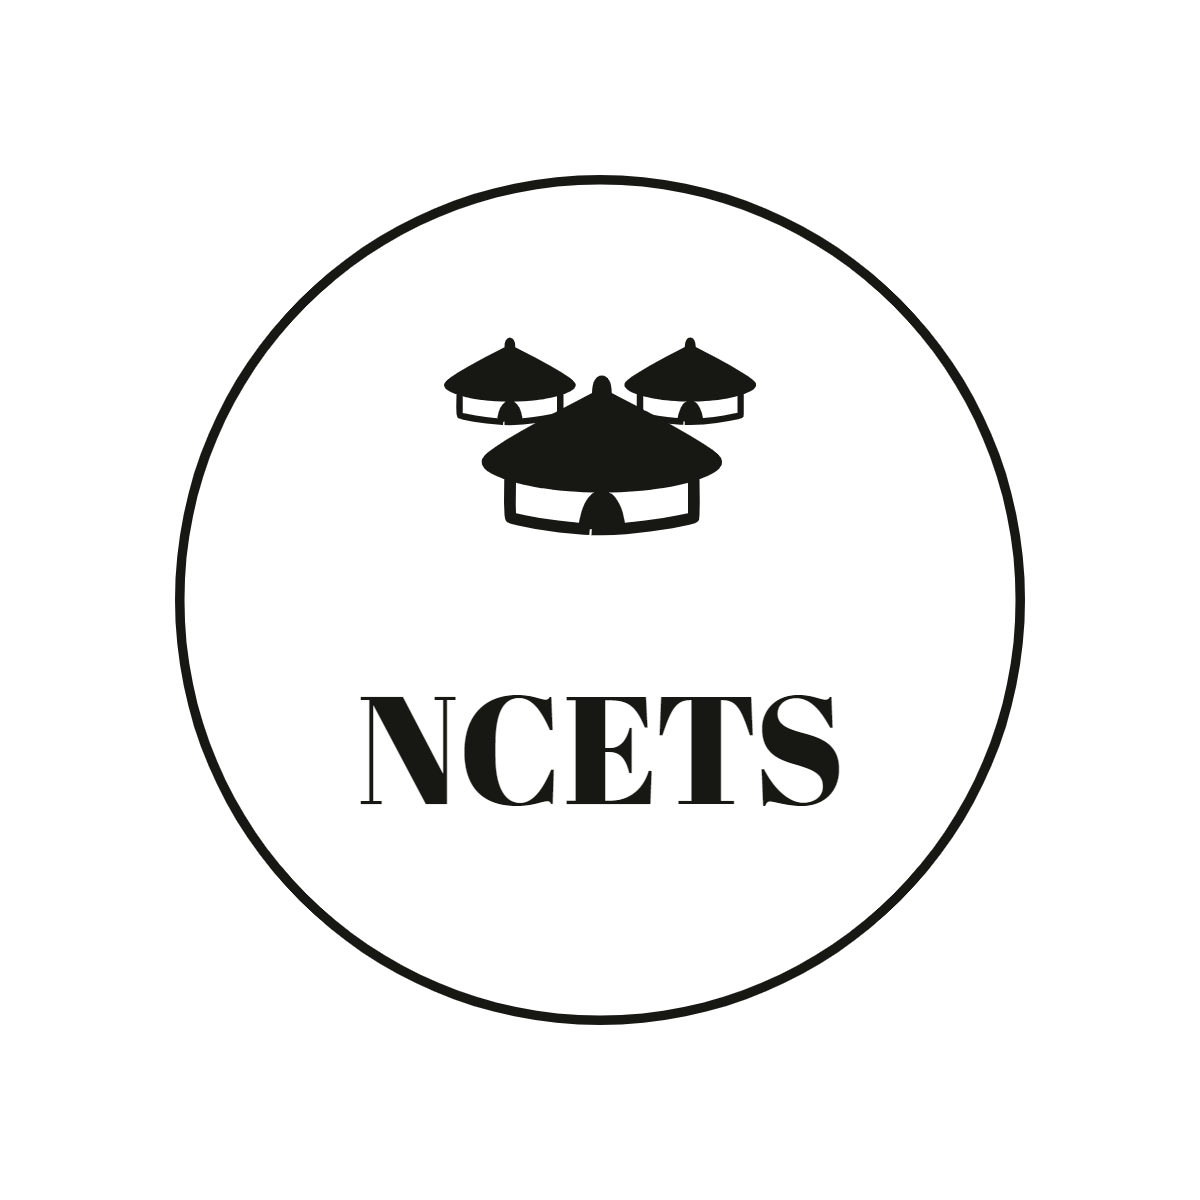 NCETS